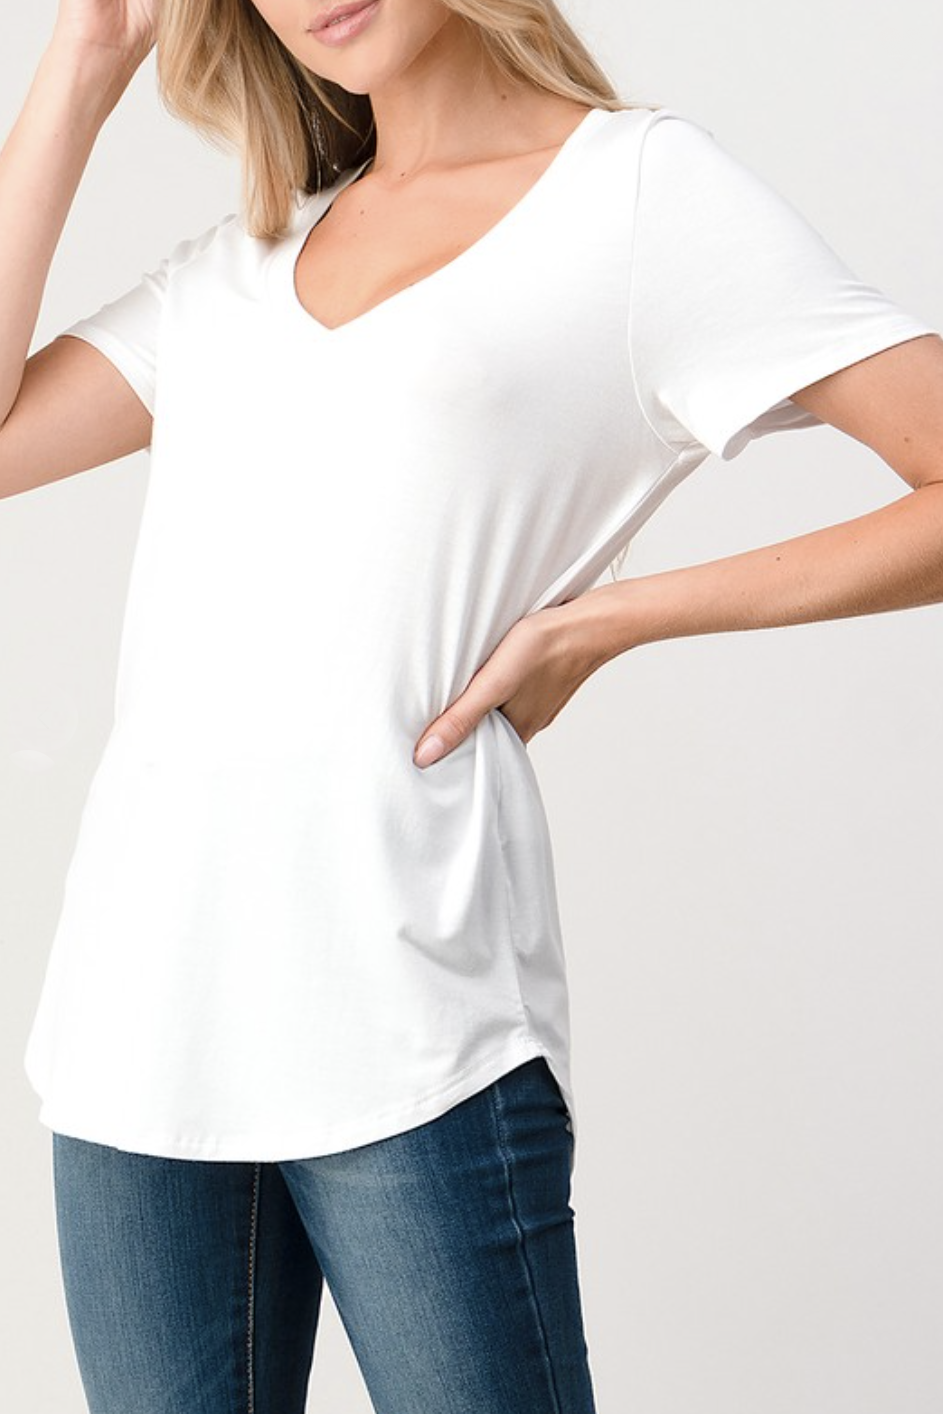 Load image into Gallery viewer, Glow Fashion Boutique White V-neck Tee
